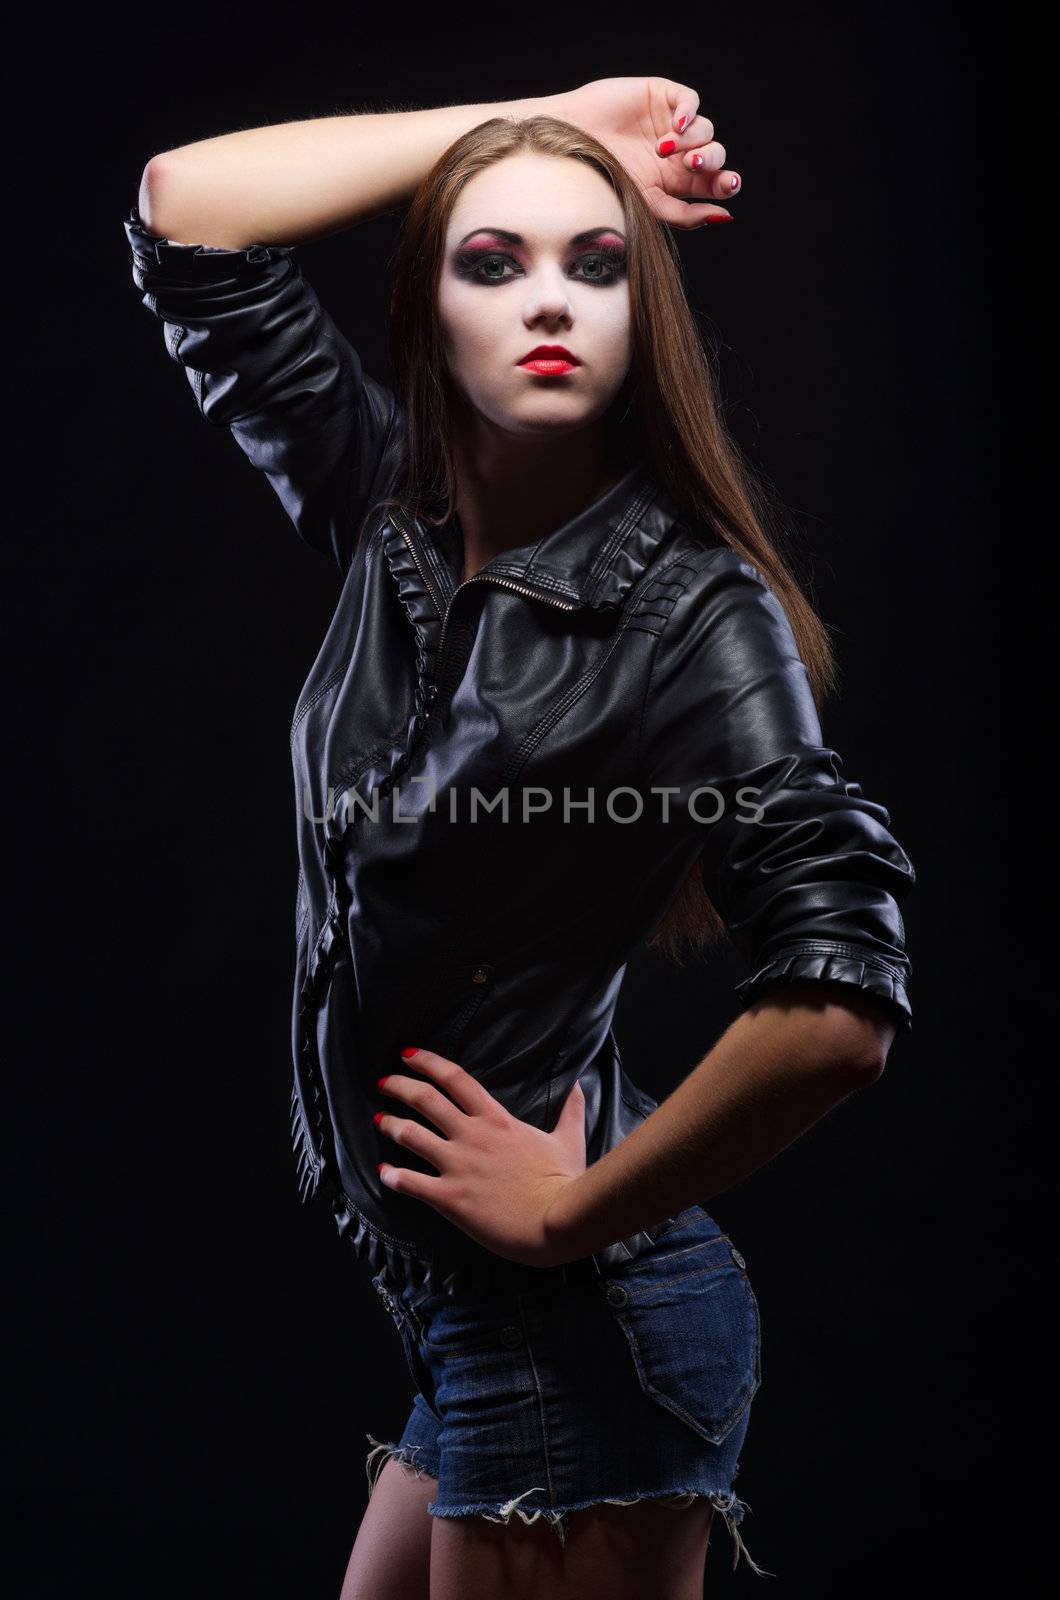 Fashion portrait of young girl by rbv